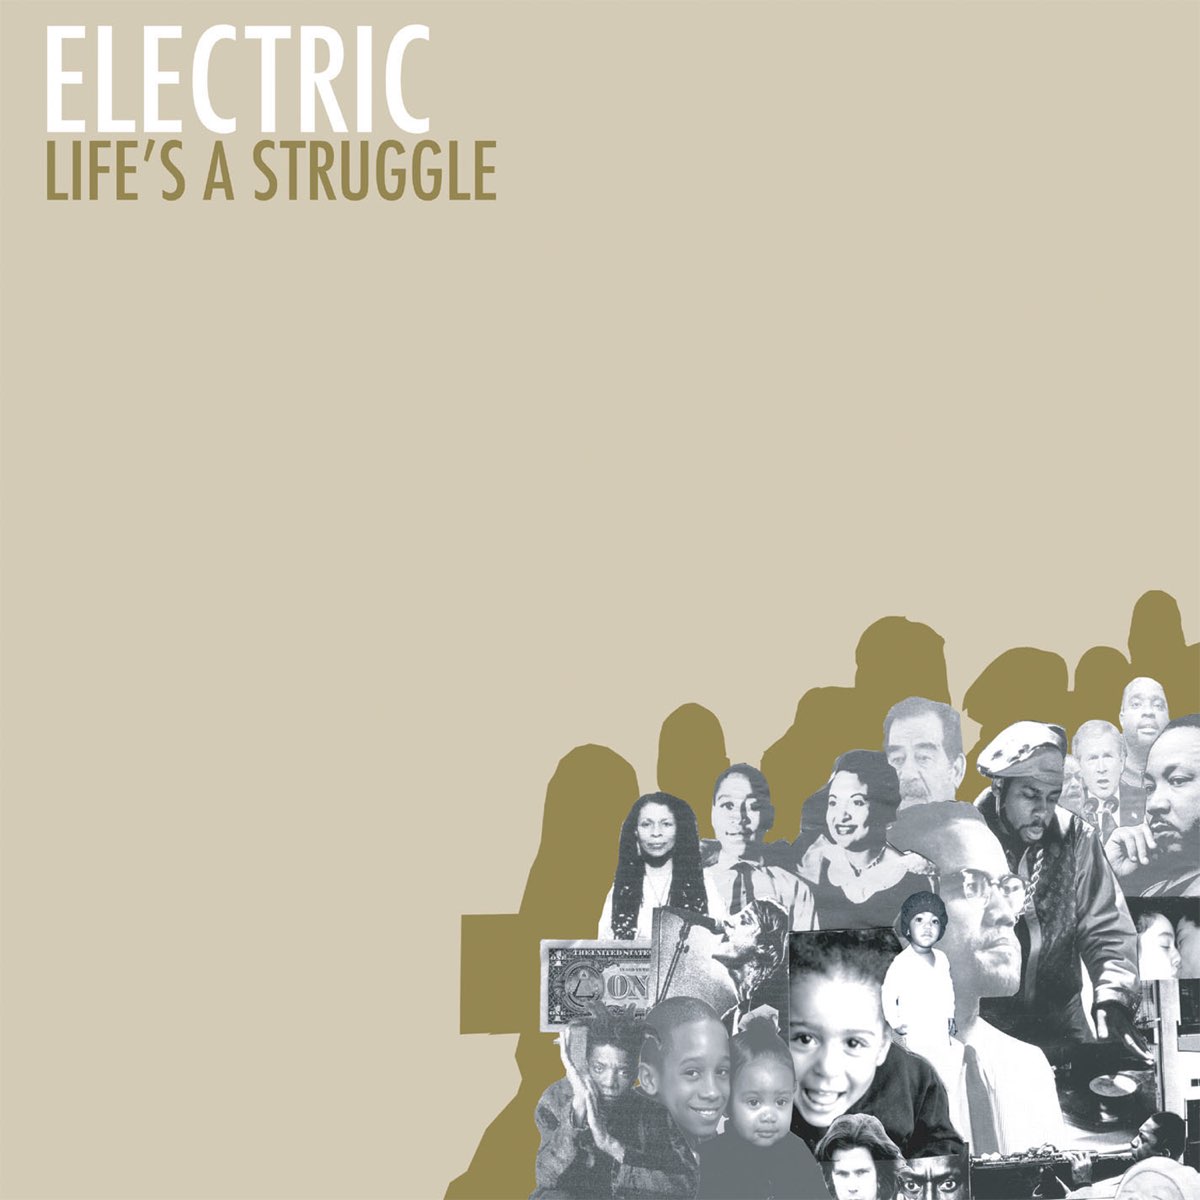 Electricity is life